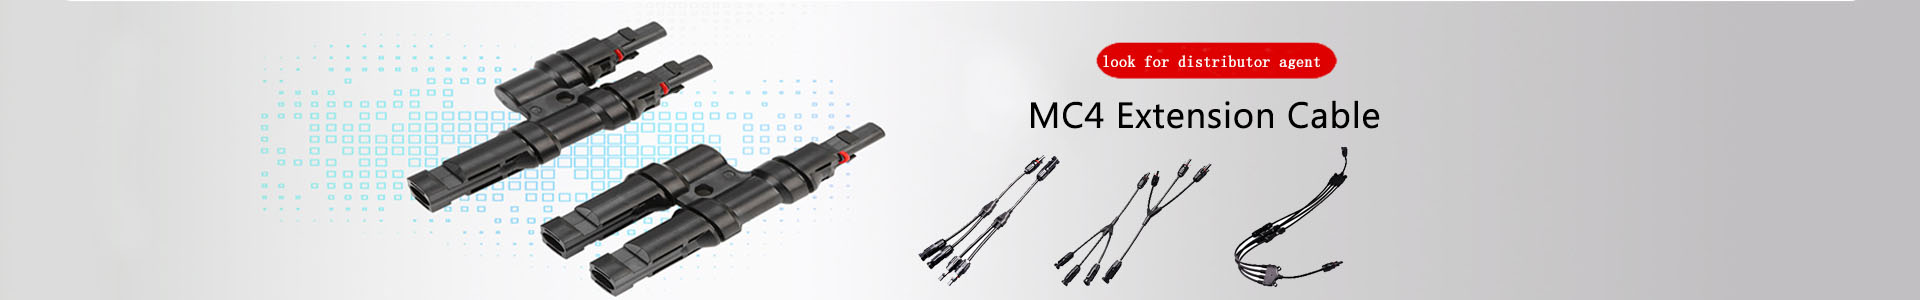 New | Handwe Group-Solar | solar connector,solar branch connector,diode fuse connector,MC4 extnsion cable,H1Z2Z2 solar cable, UL4703 solar cable | Leading manufacturer and supplier of solar pv cables and connectors